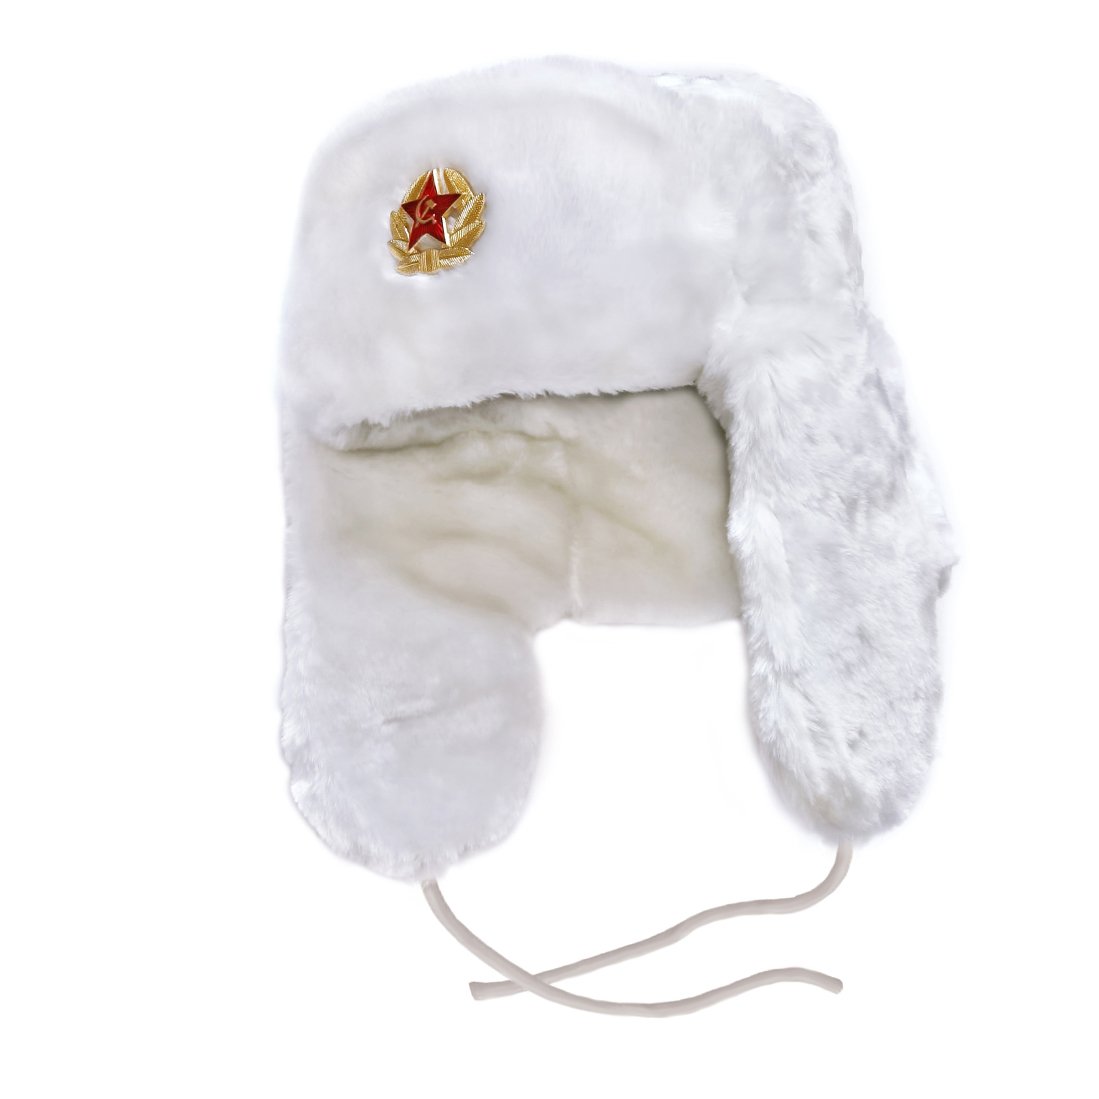 Ushanka, size 56/S. Russian Military Hat with Soviet Army Soldier Insignia, White